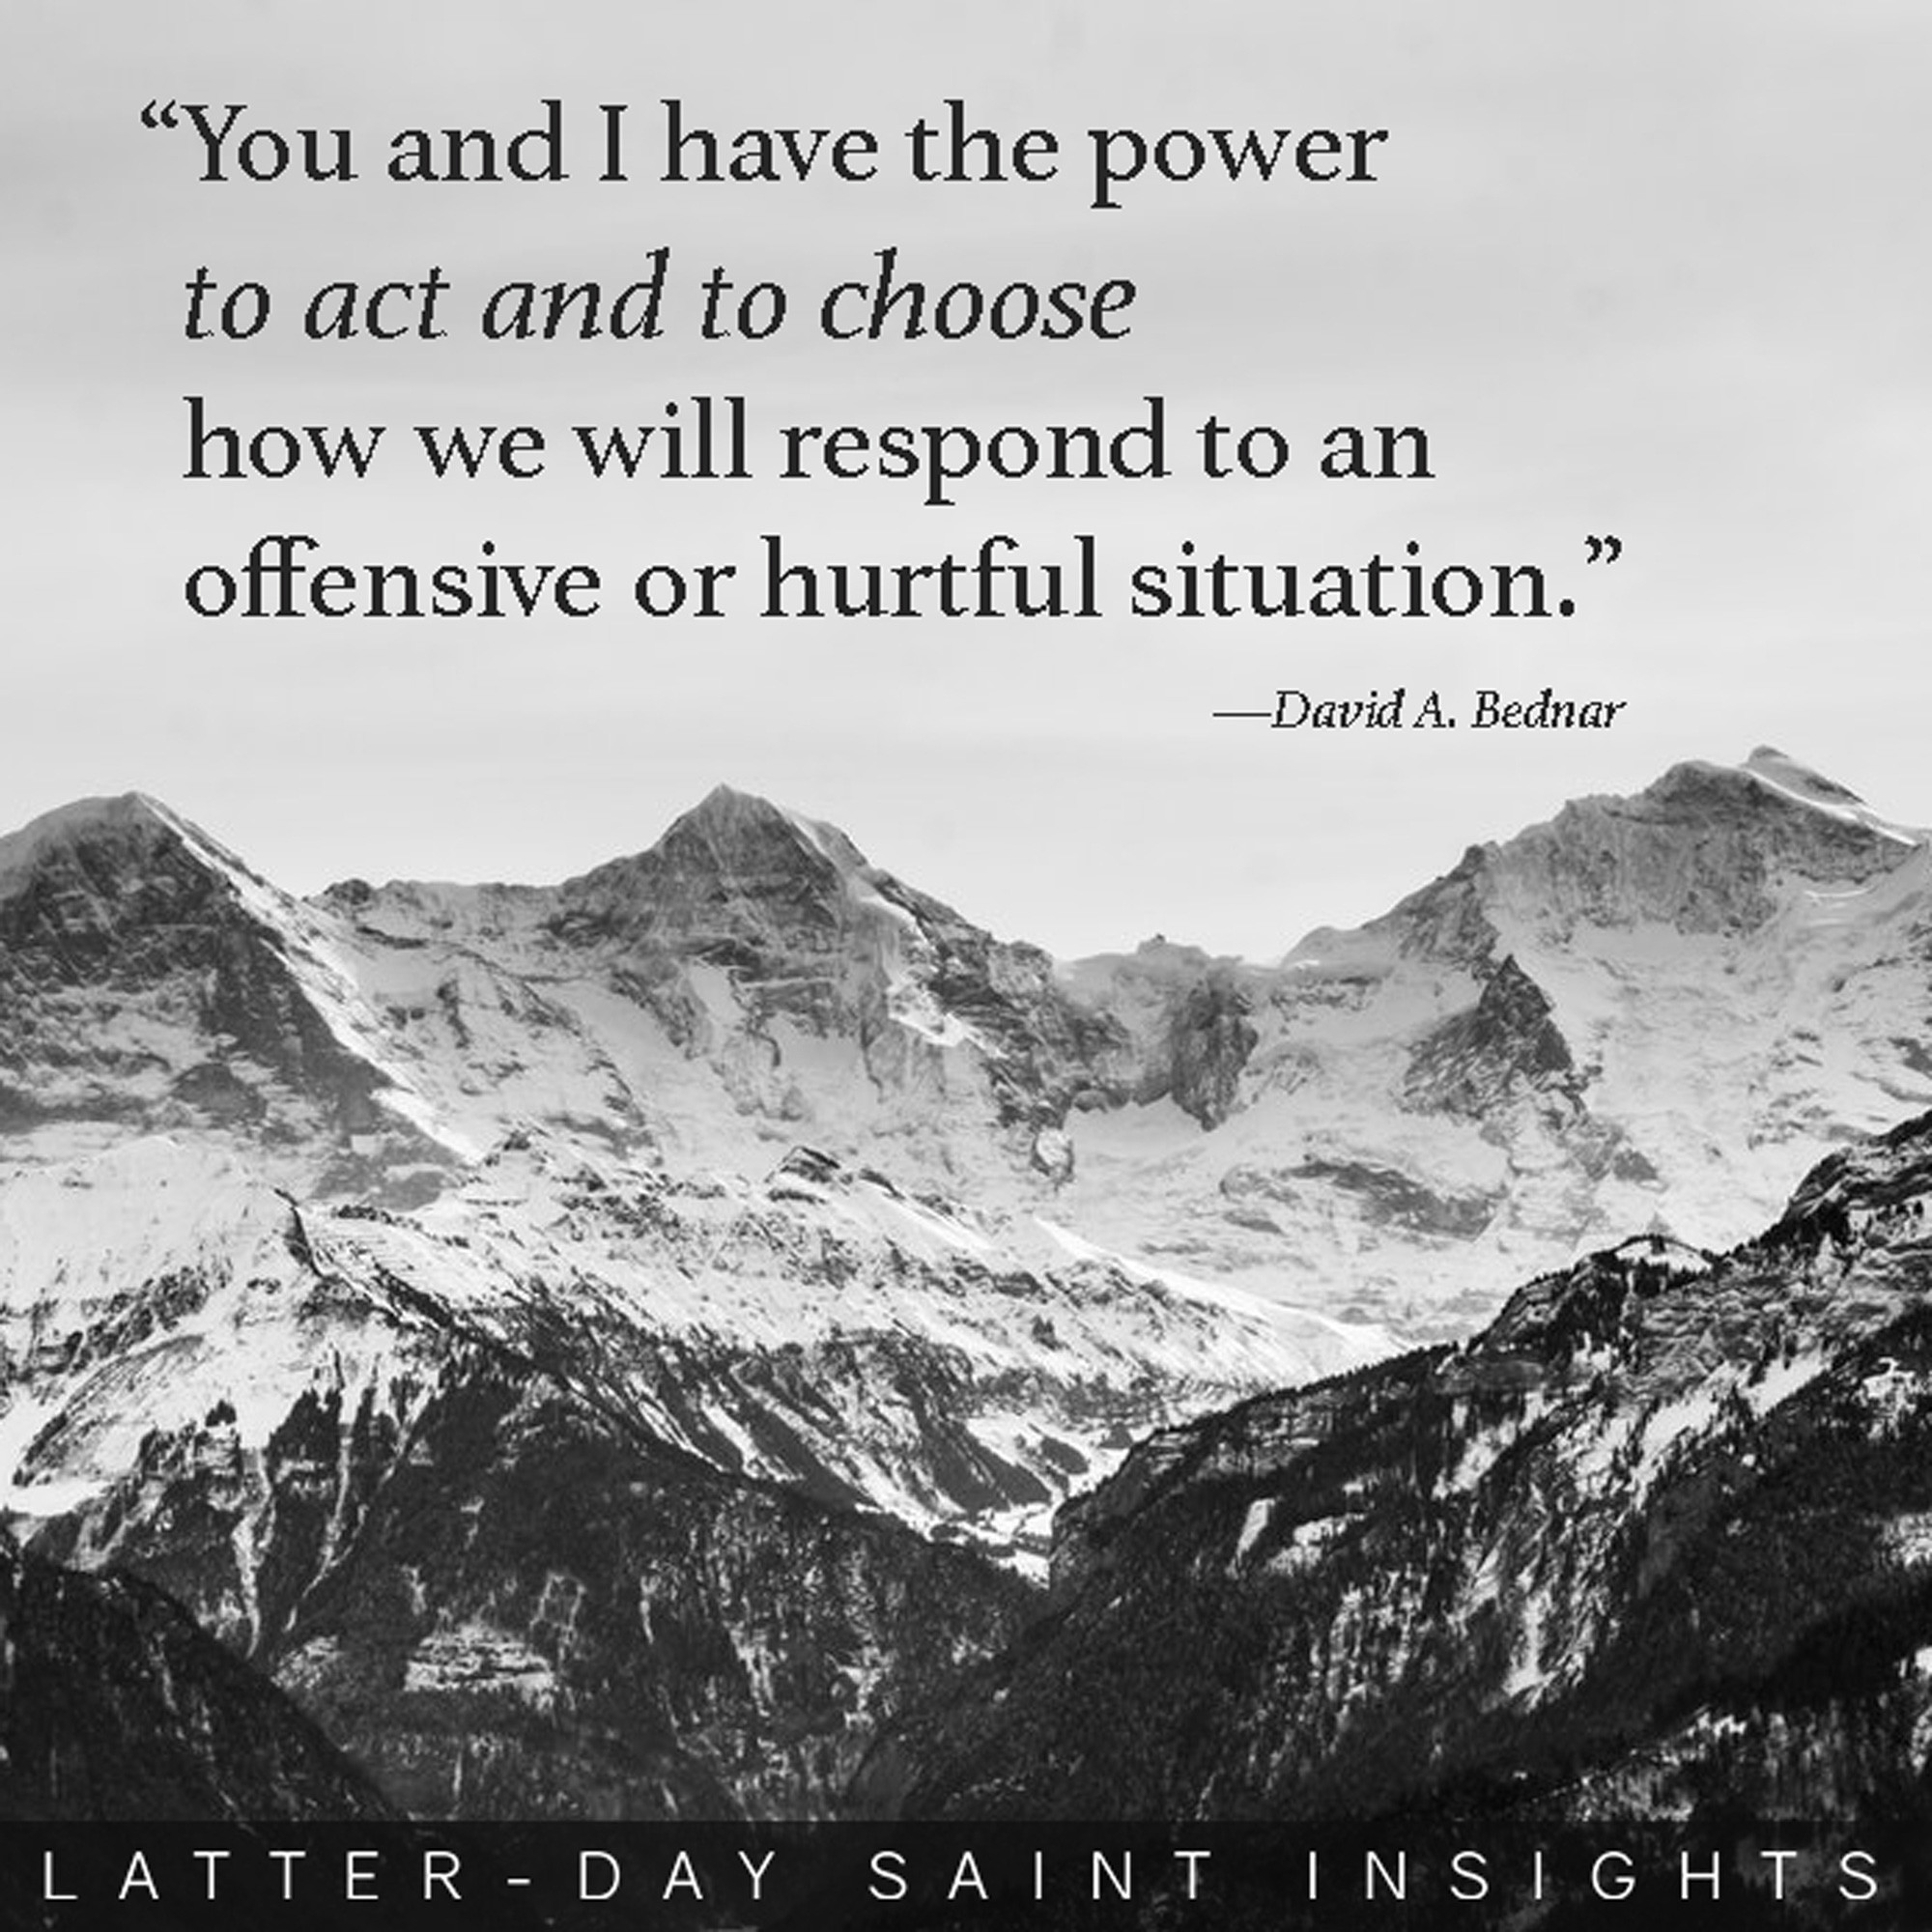 "You and I have the power to act and to choose how we will respond to an offensive or hurtful situation." -David A. Bednar